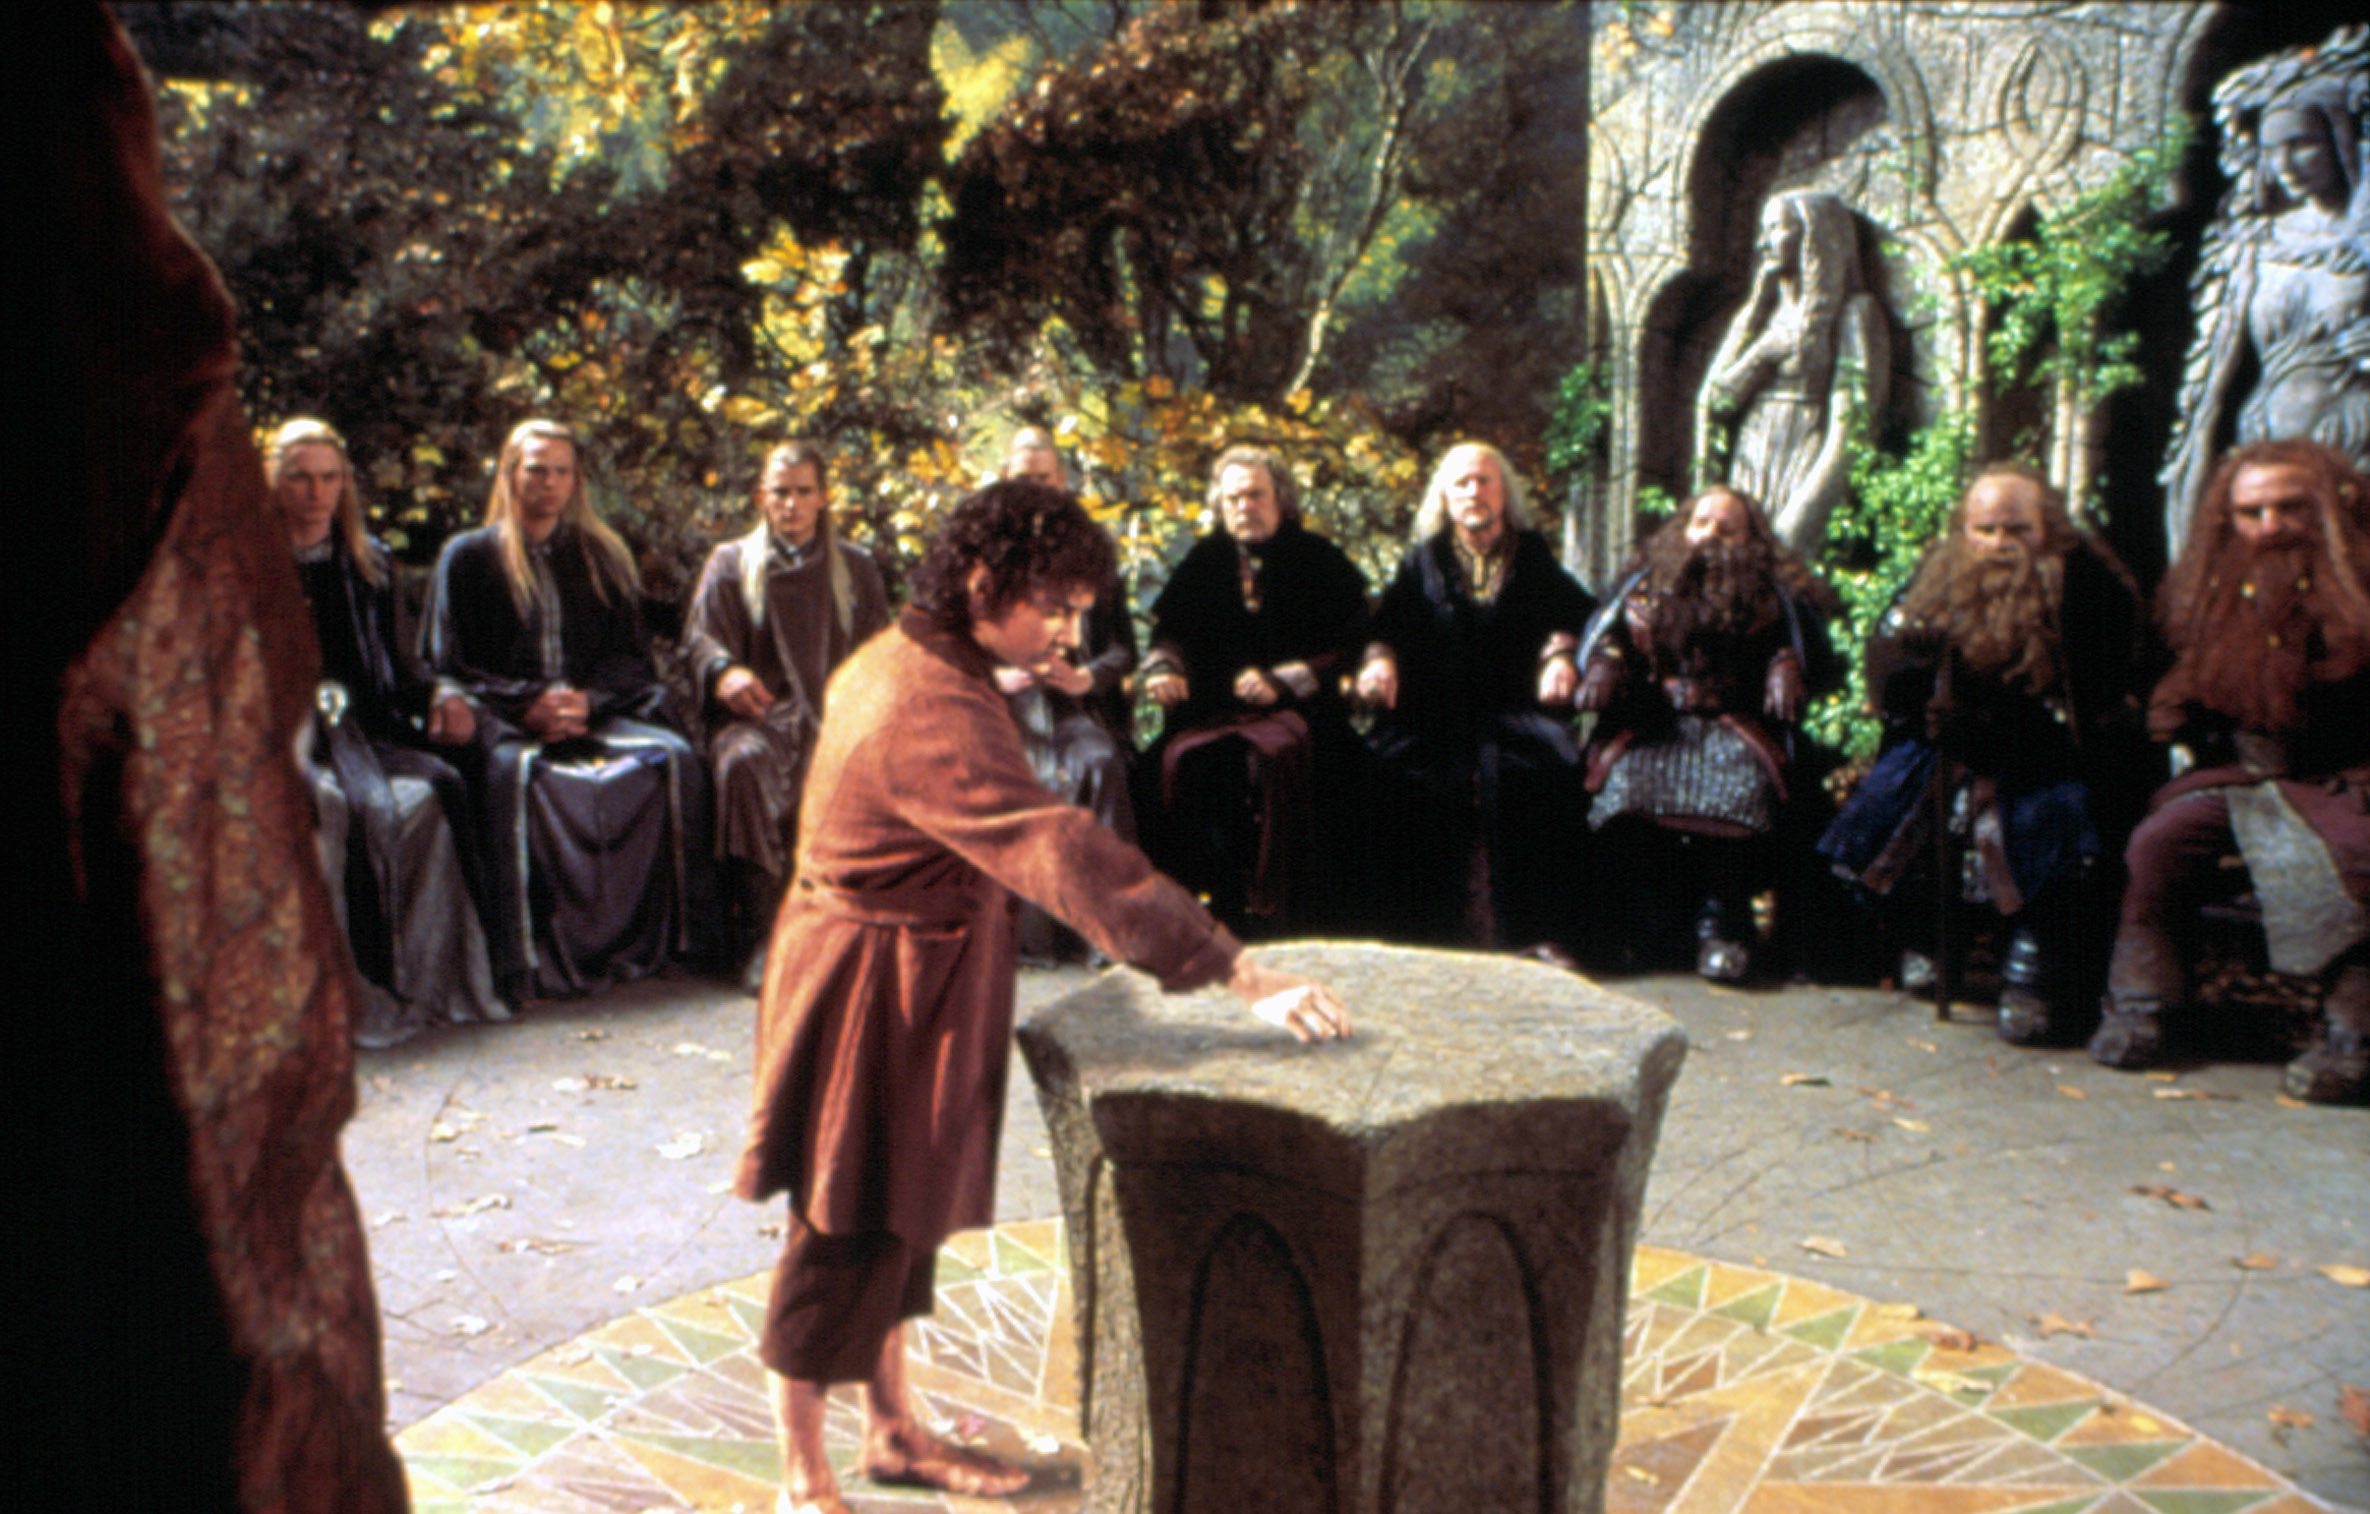 Frodo speaking to the Council of Elrond